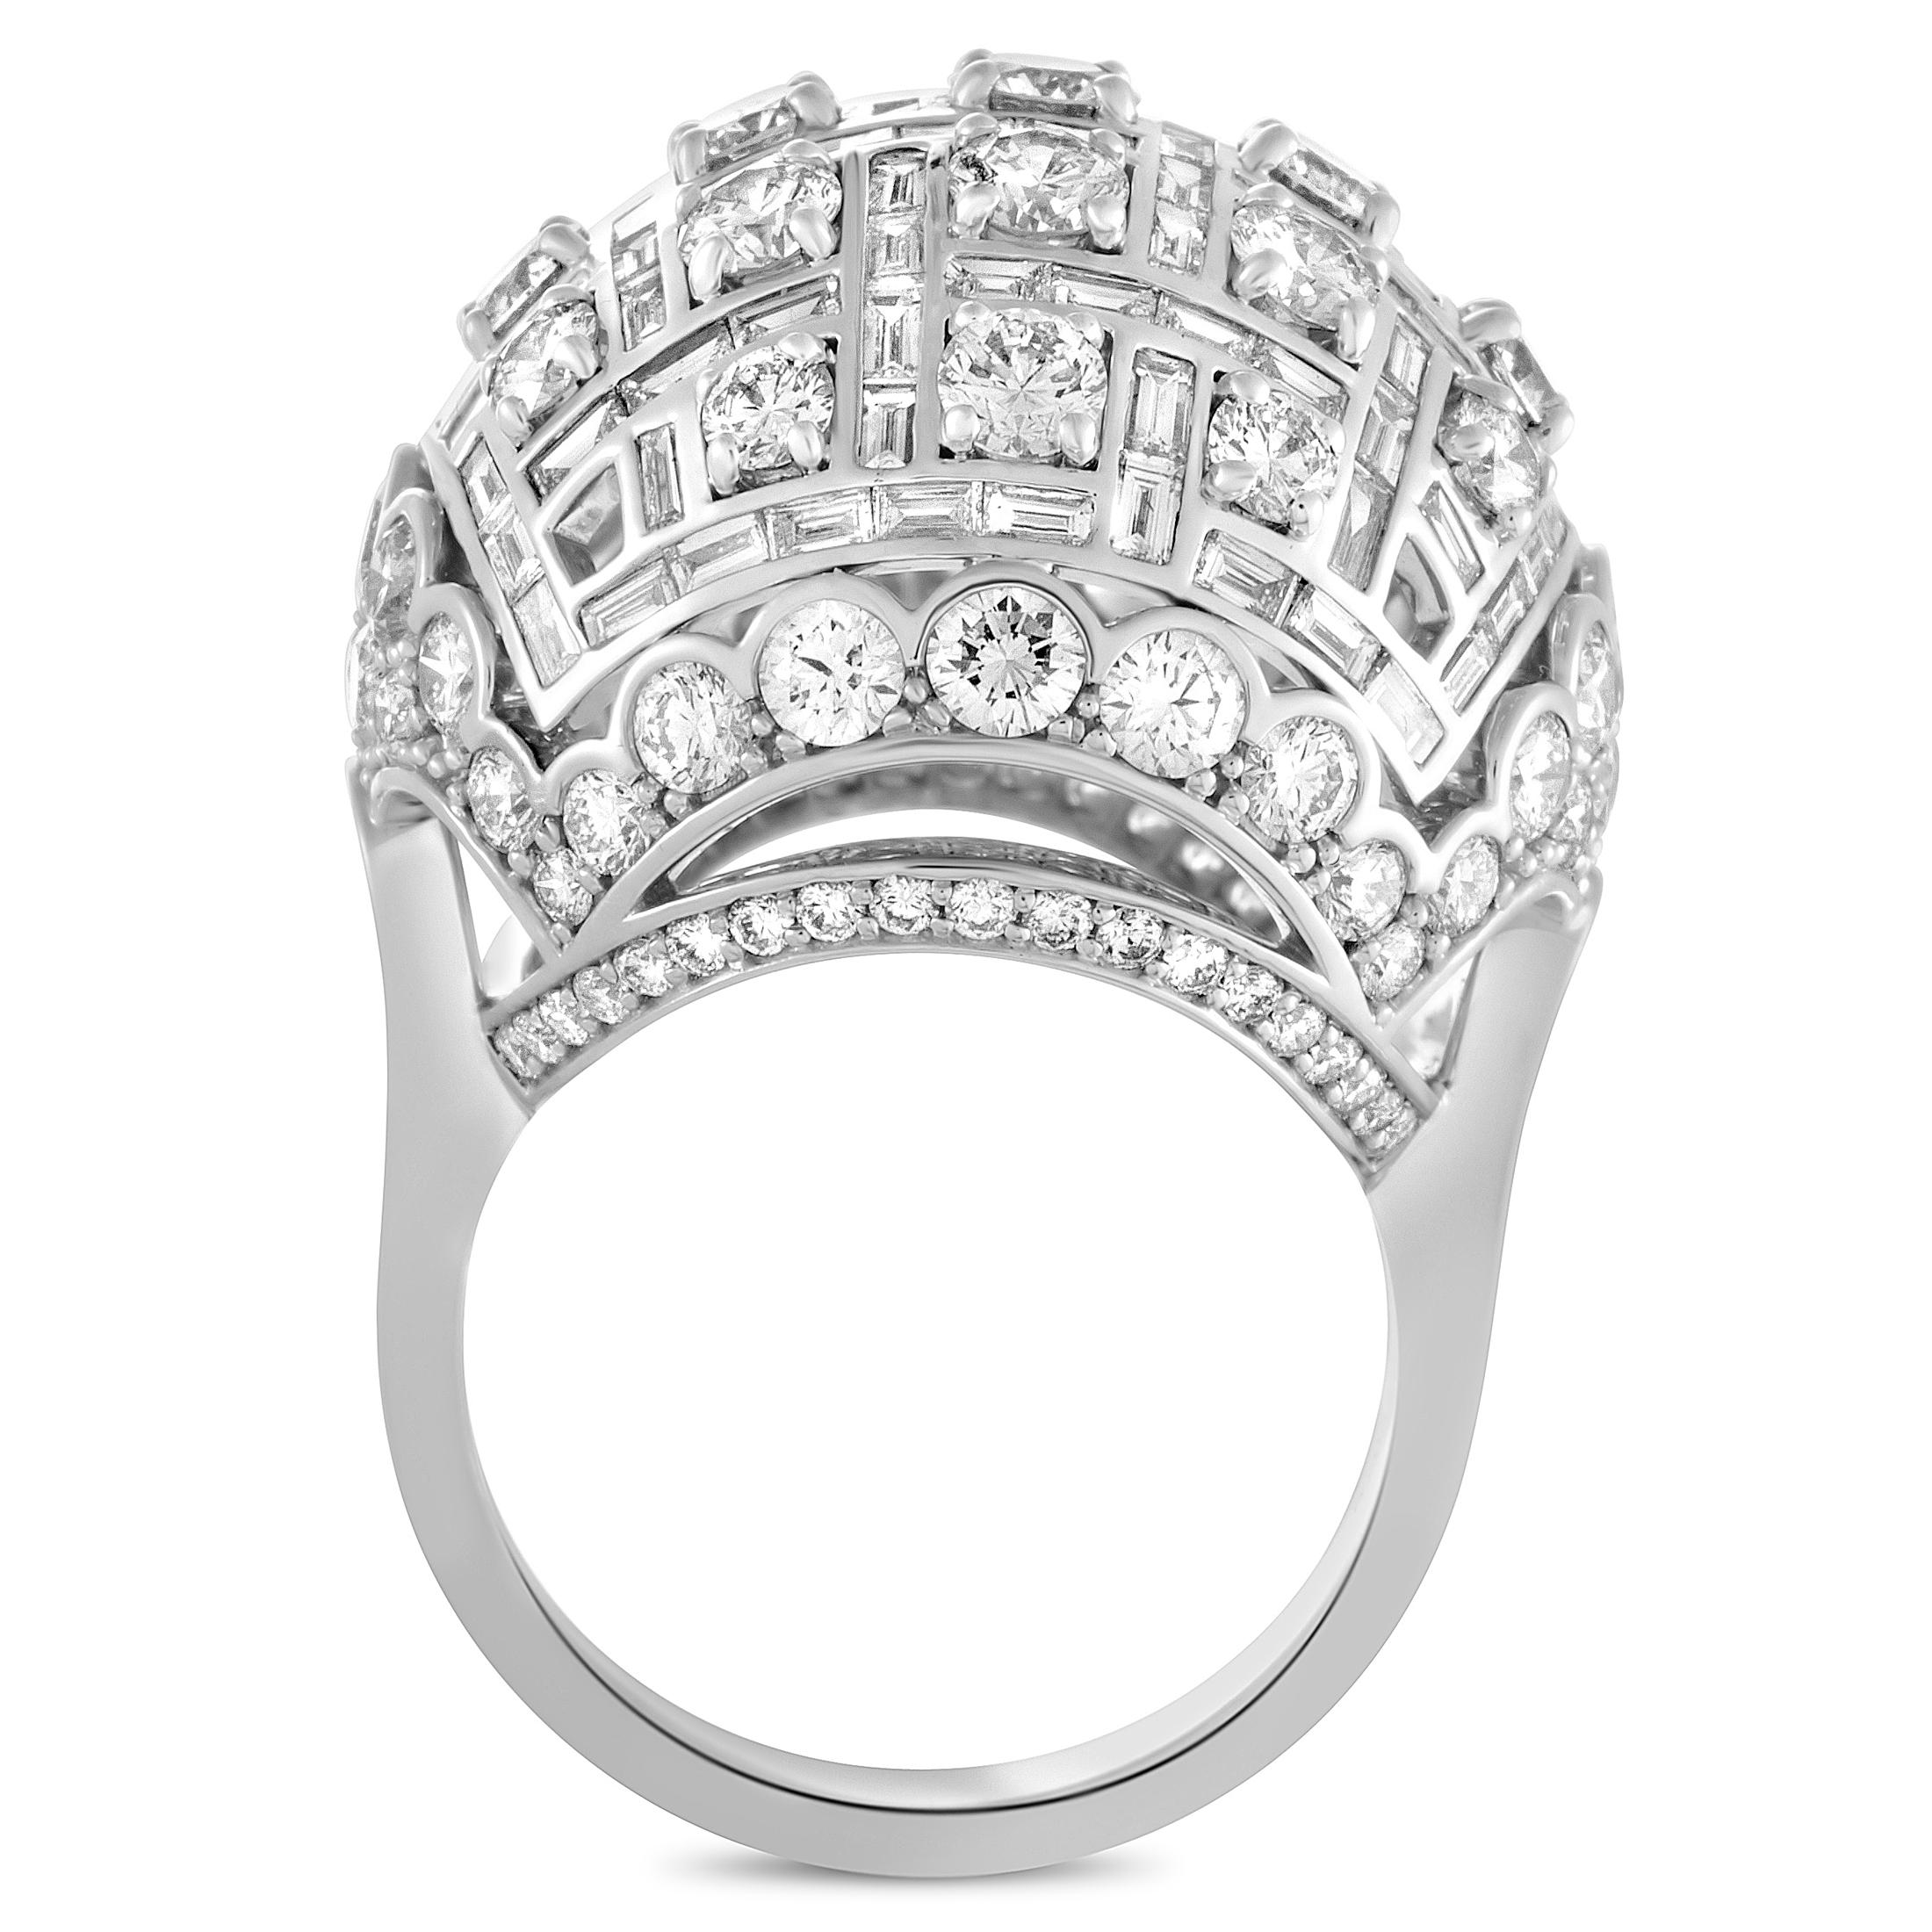 A fabulous fusion of elegant golden sheen and lustrous diamond brilliance, this extravagant ring from Harry Winston offers an incredibly luxurious look. The ring is expertly crafted from 18K white gold and it is set with a plethora of round and